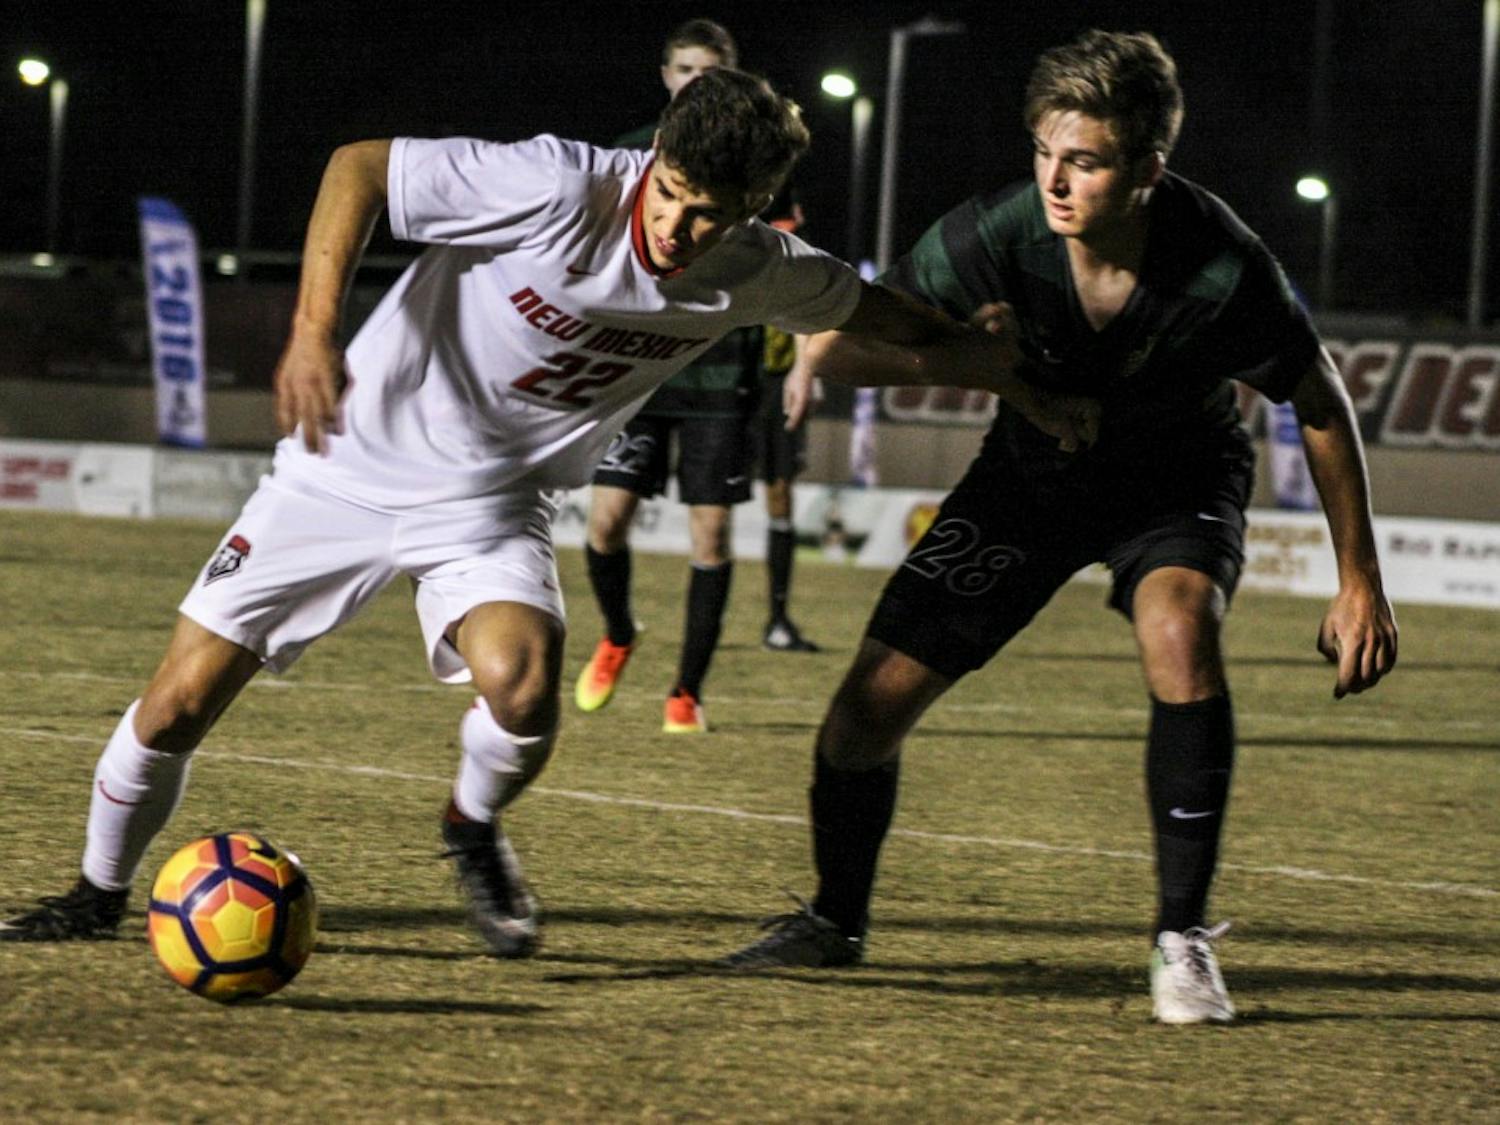 UNM senior Aaron Herrera defends the ball against a University of North Carolina at Charlotte on Oct. 28, 2017. The match ended in a 0-0 draw.